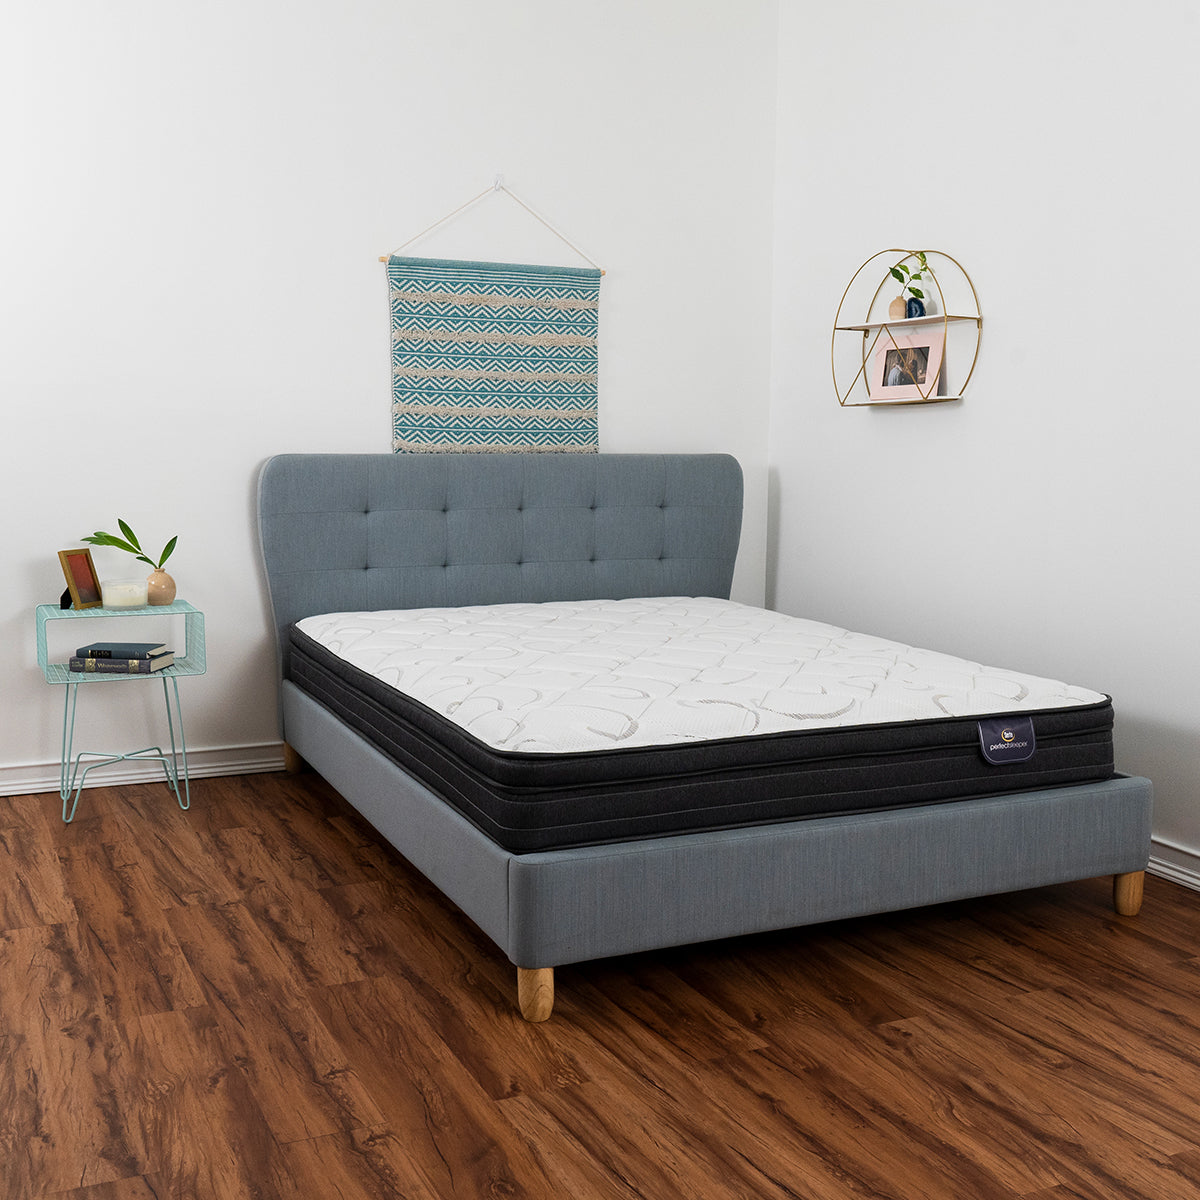 Serta Perfect Sleeper® Seabright Euro Top Mattress On Bed Frame In Bedroom Side View